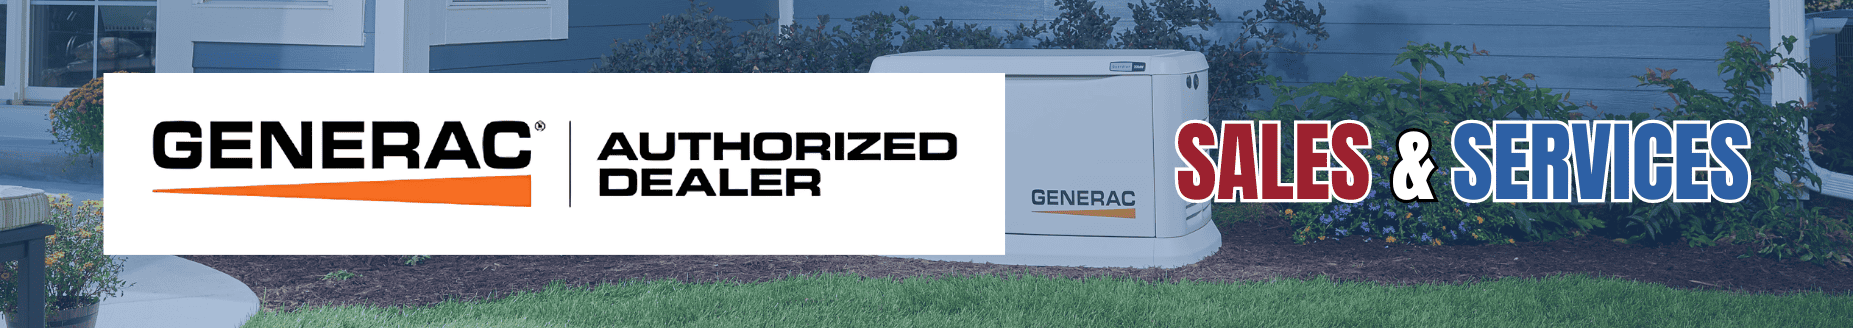 Gigawatts Electric Proud to be an authorized Generac generator dealer